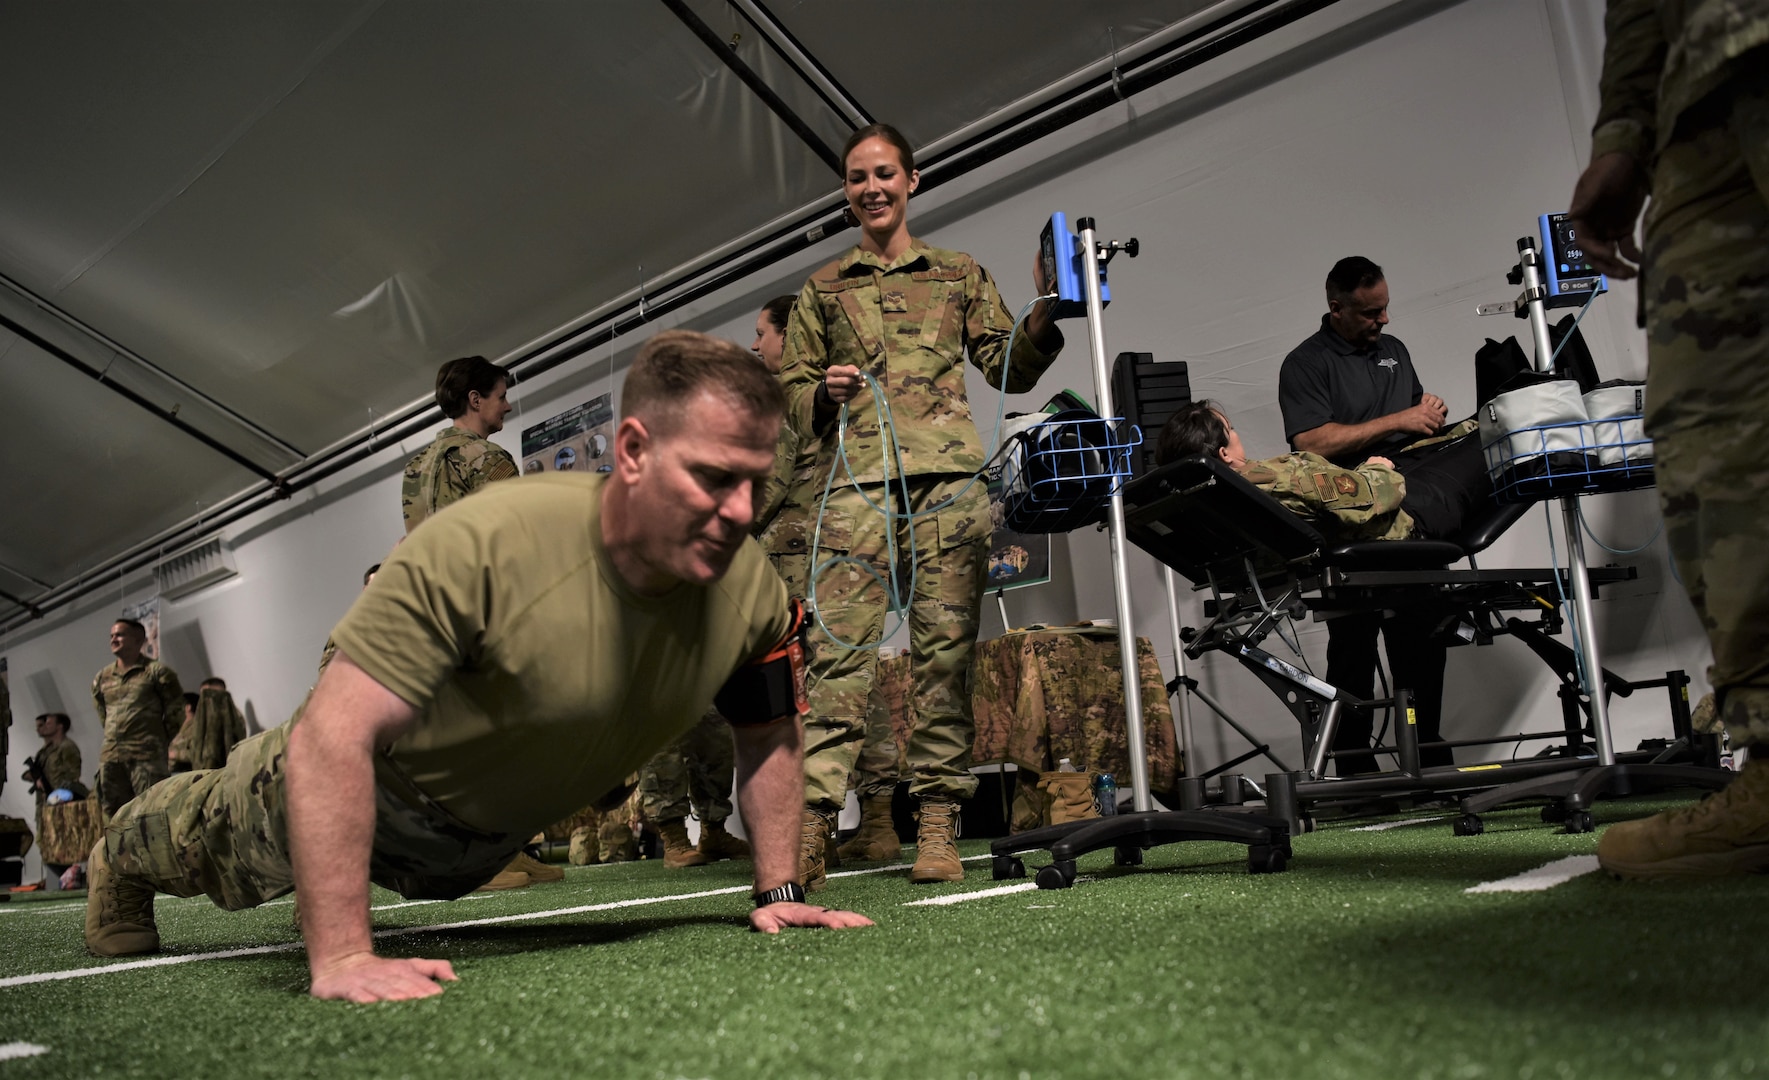 Push-ups on turf in the Temporary Human Performance Center